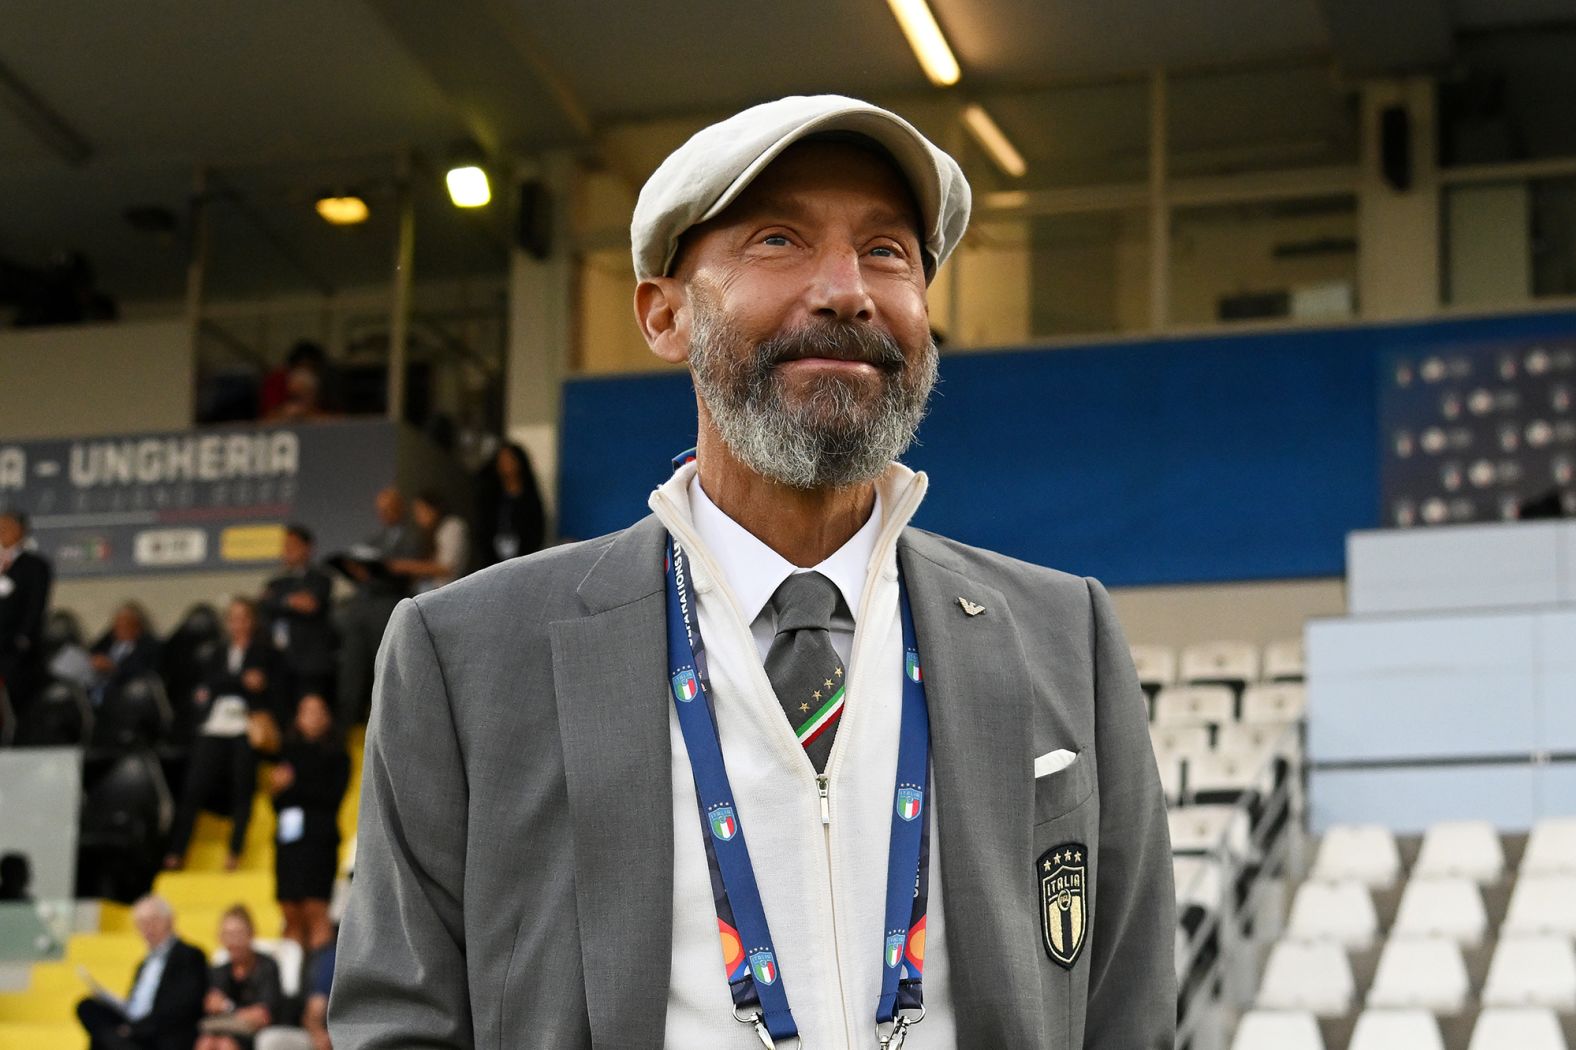 Italian football legend <a href="https://edition.cnn.com/2023/01/06/football/gianluca-vialli-death-spt-intl/index.html" target="_blank">Gianluca Vialli </a>died on January 6 after a battle with pancreatic cancer. Vialli, 58, played for Italian clubs Sampdoria and Juventus, where he won the 1996 Champions League before playing for the English Premier League team Chelsea. He also played 59 times for the Italian national team.